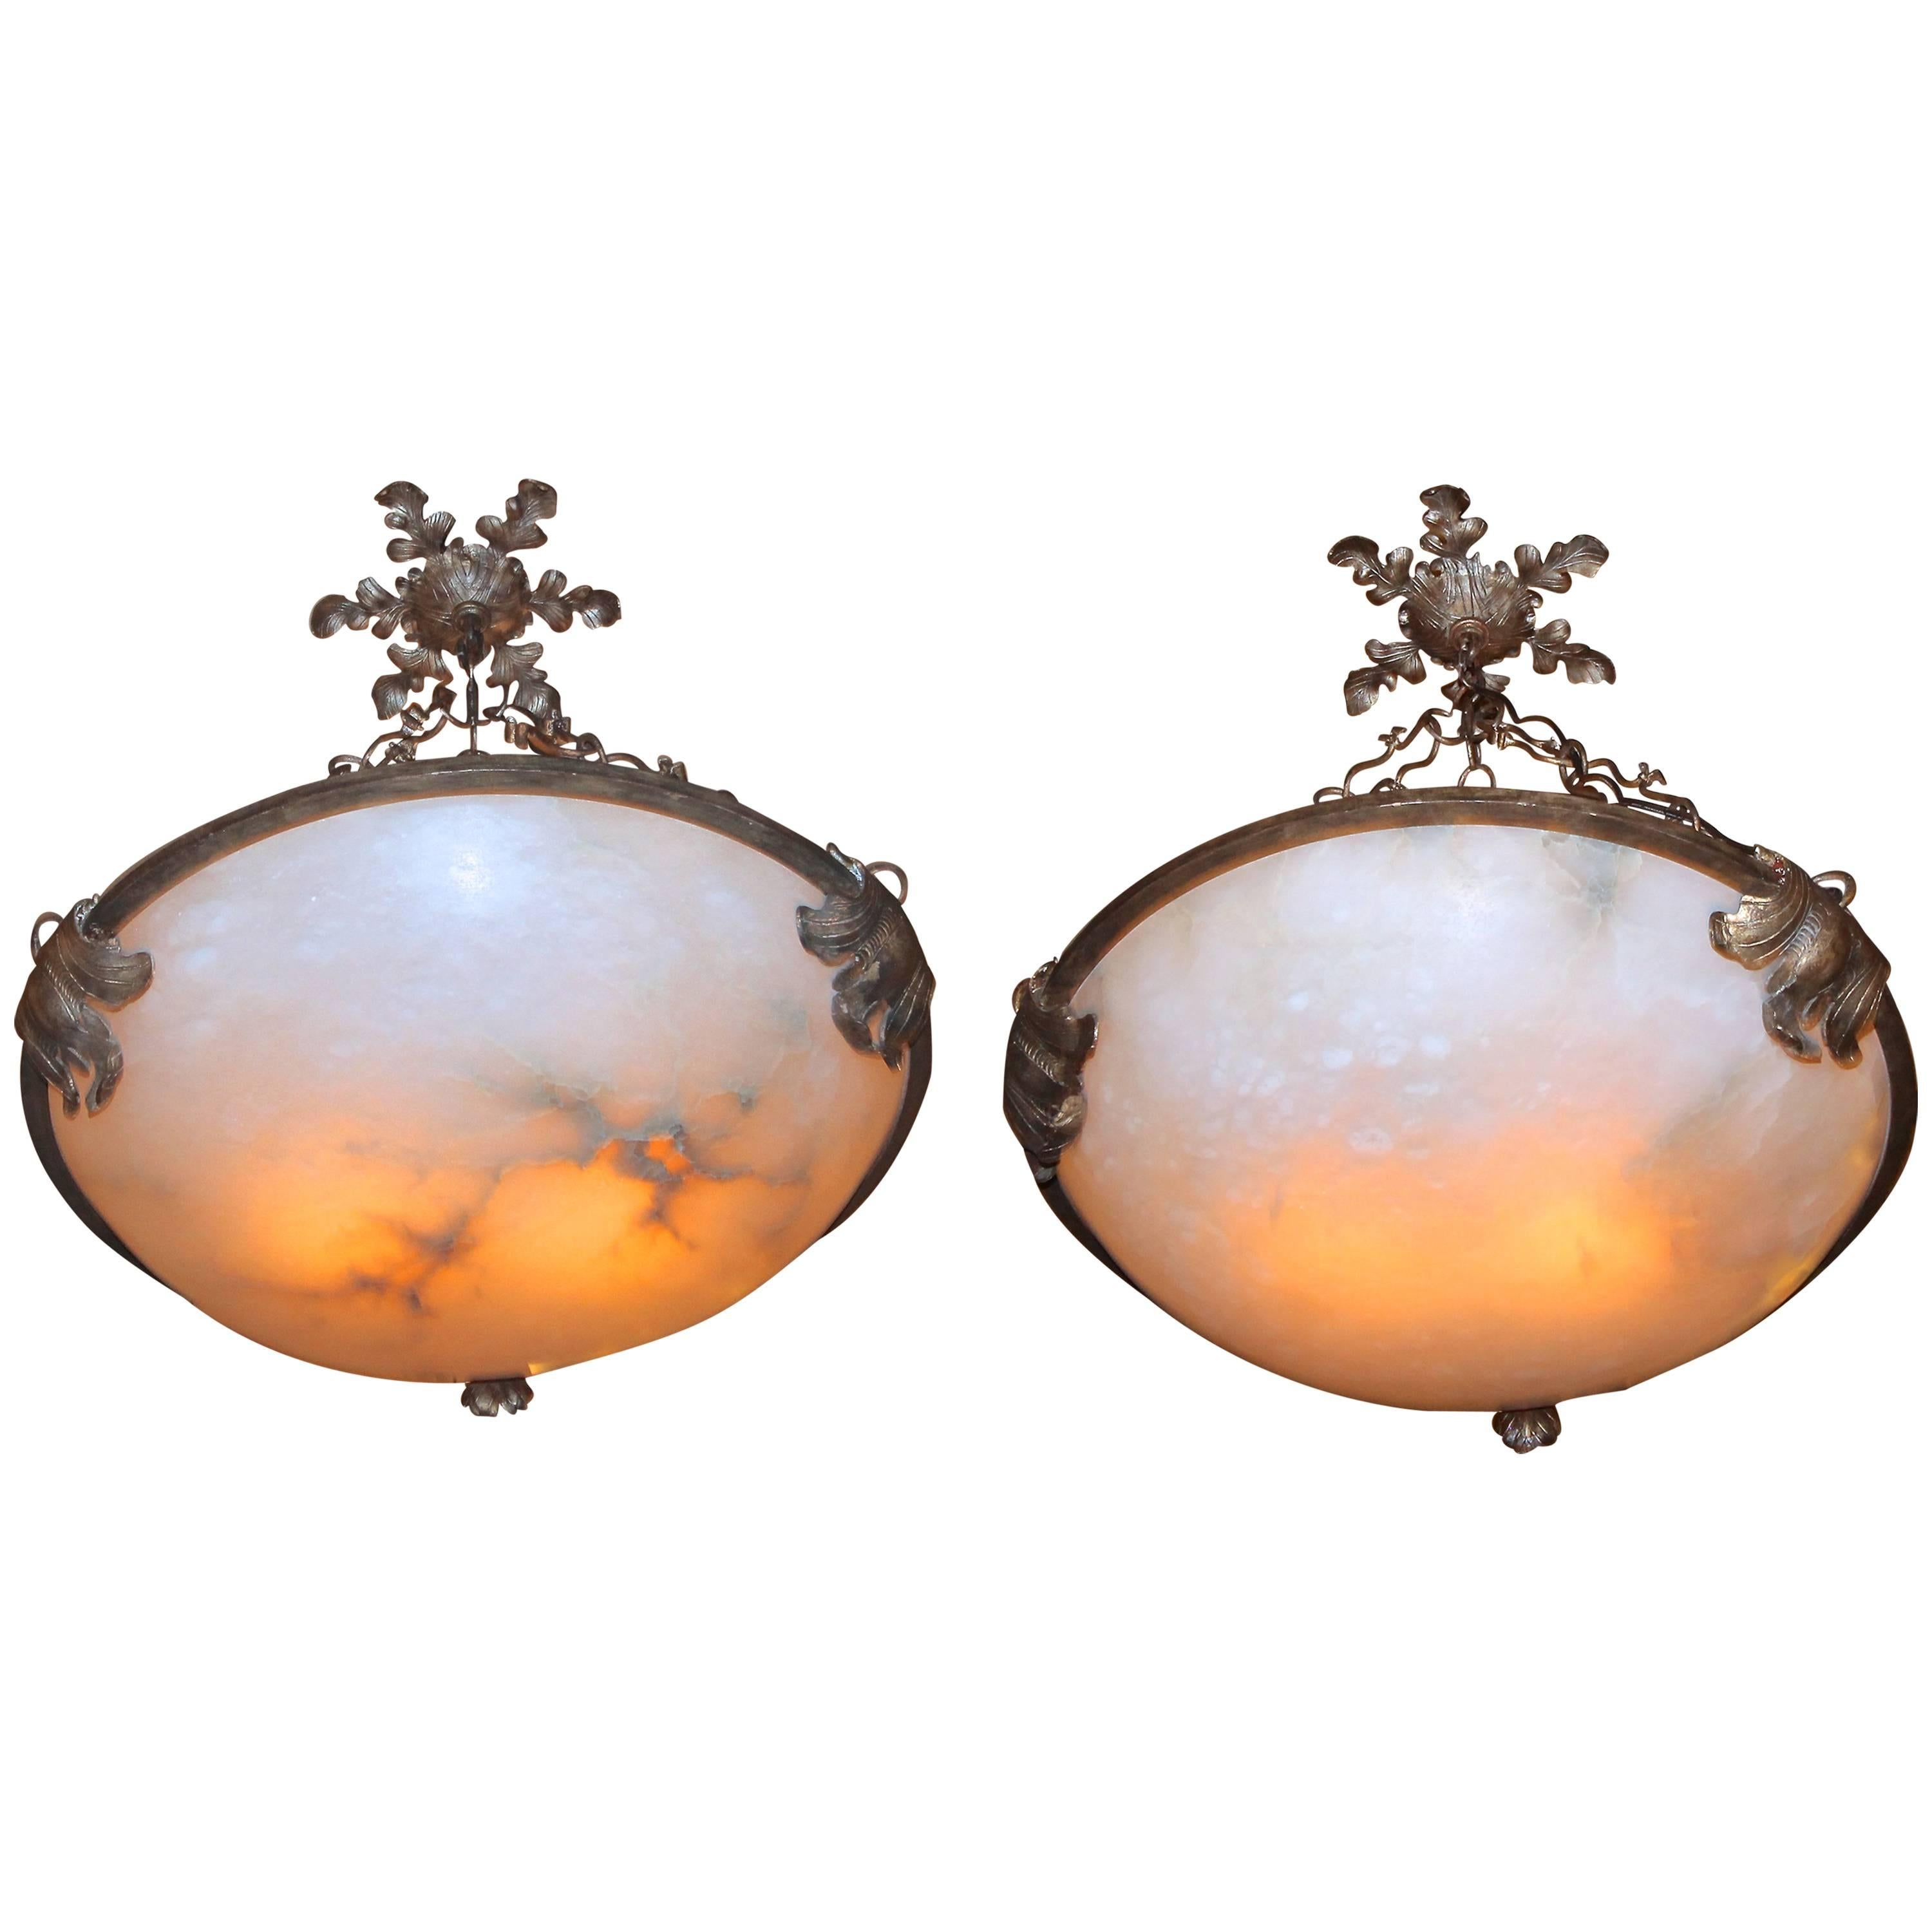 Pair of Large Alabaster and Wrought Iron Pendant Lights